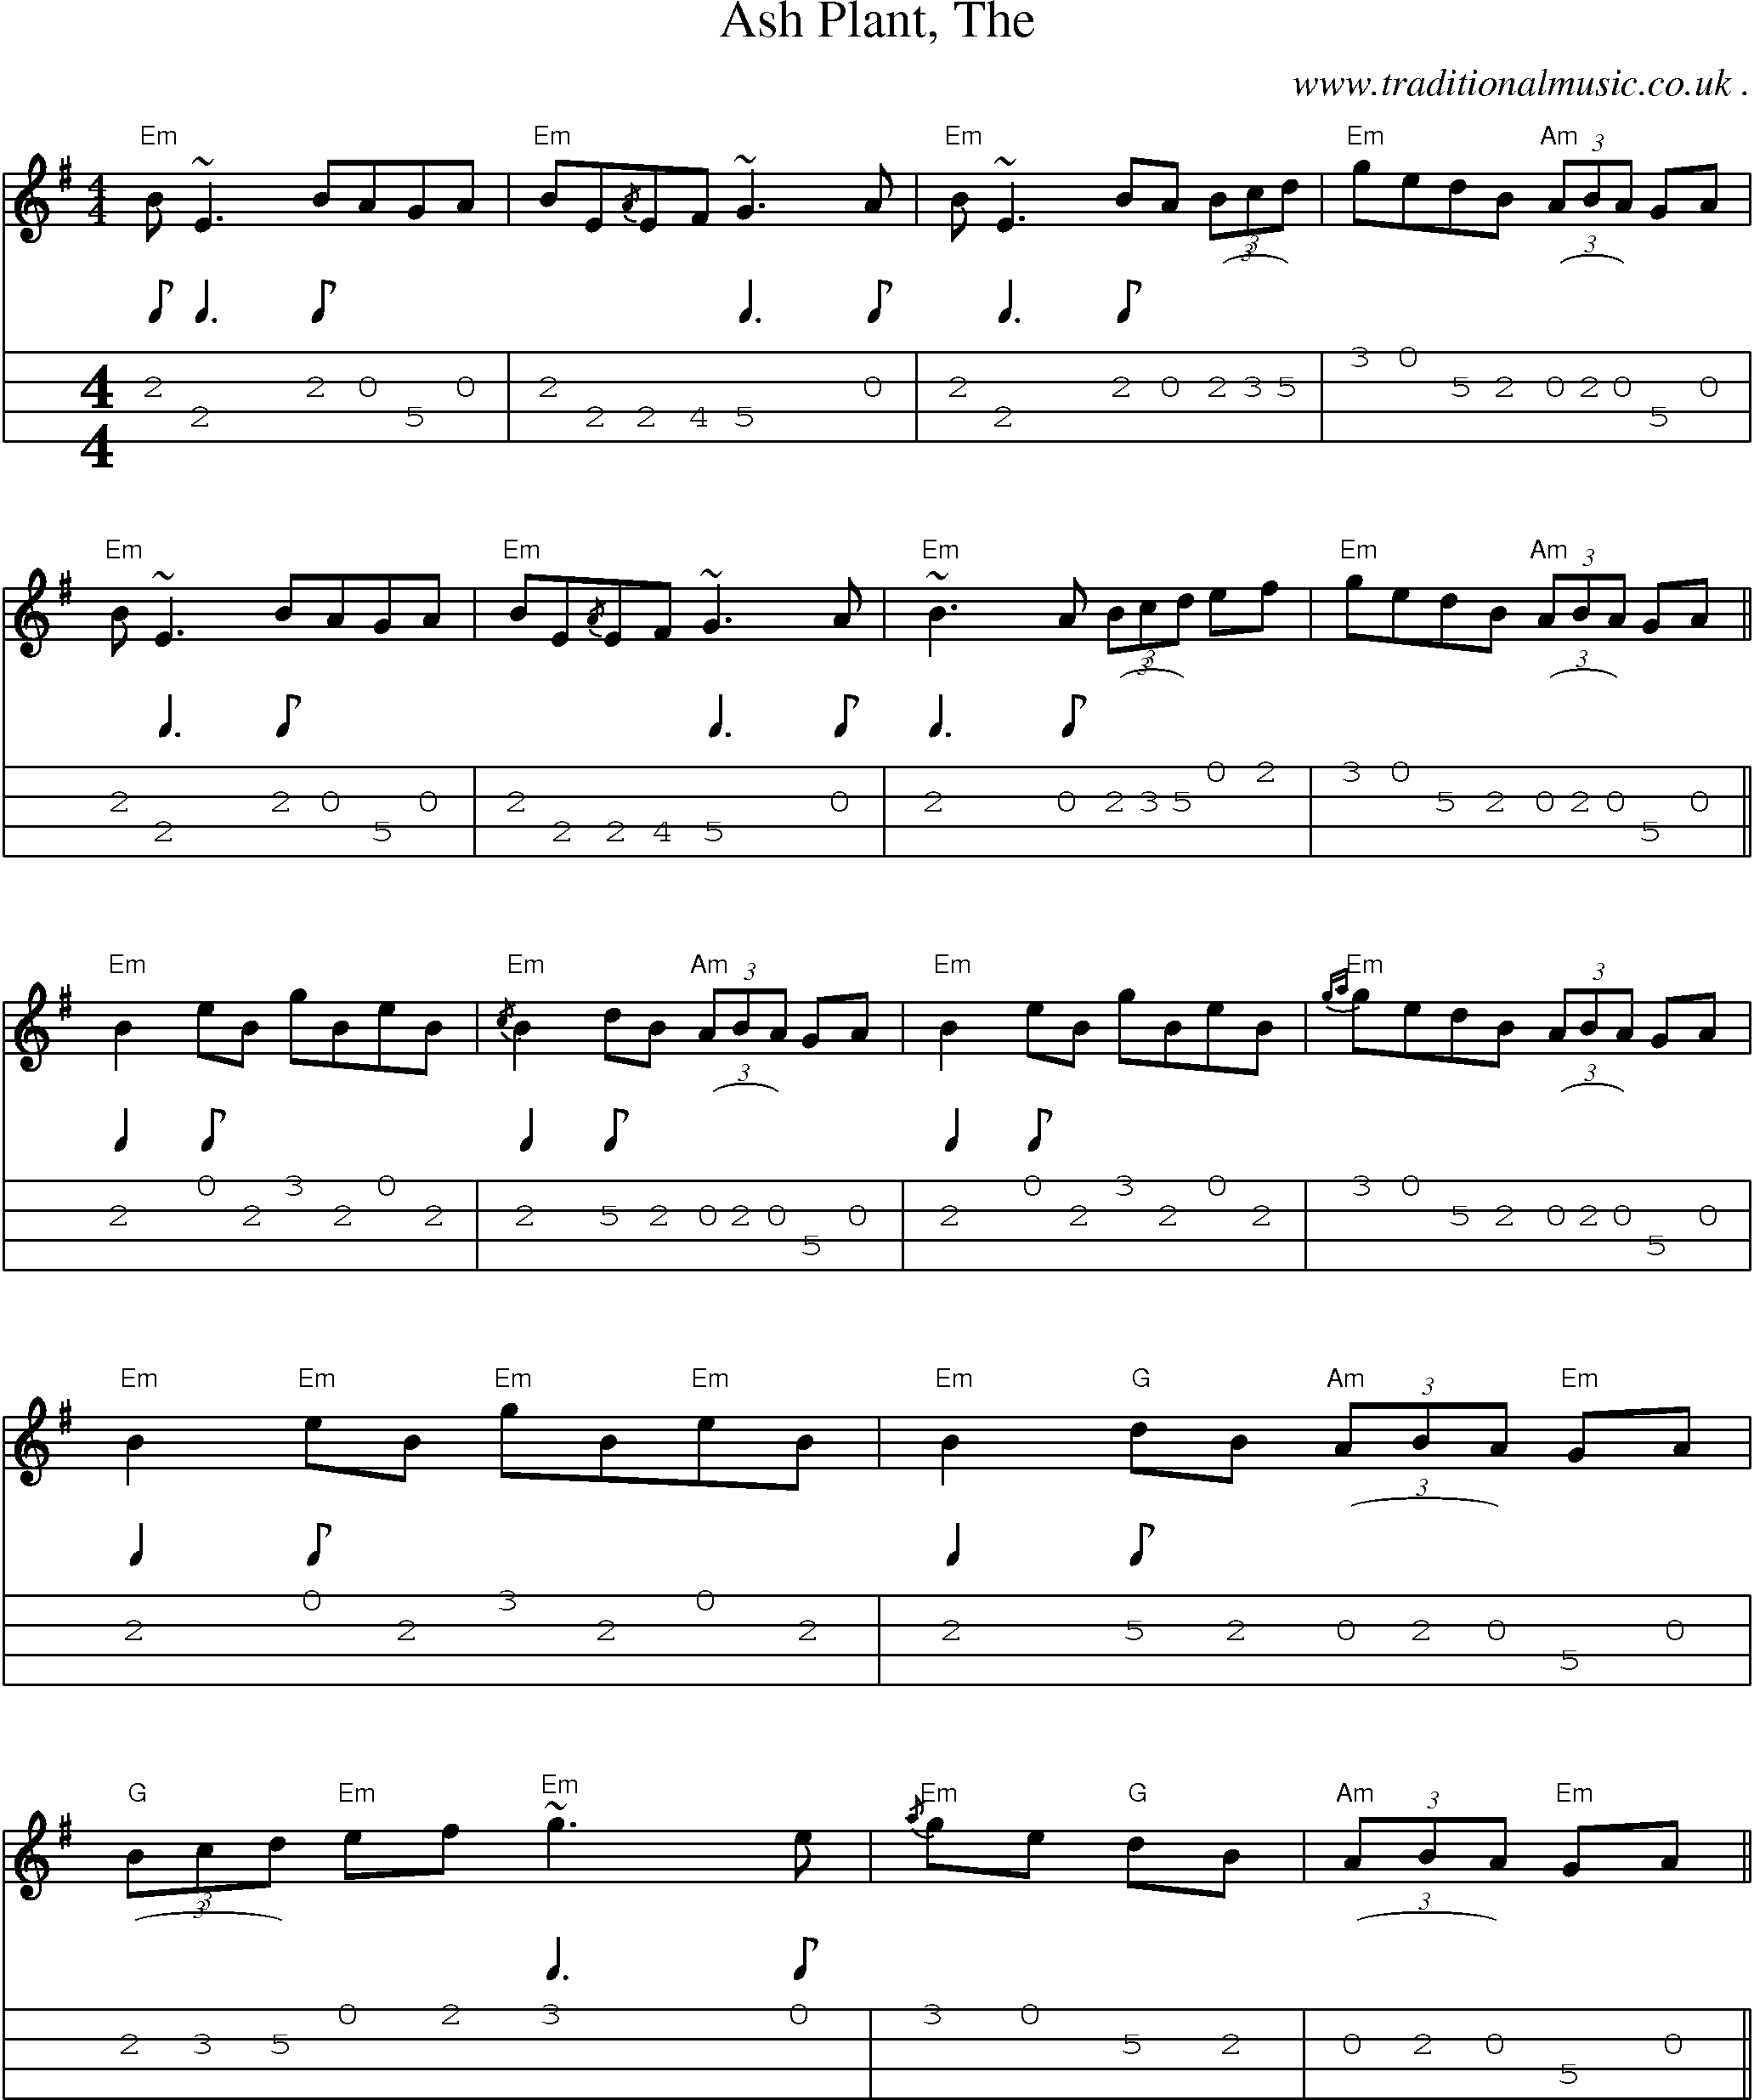 Music Score and Guitar Tabs for Ash Plant The